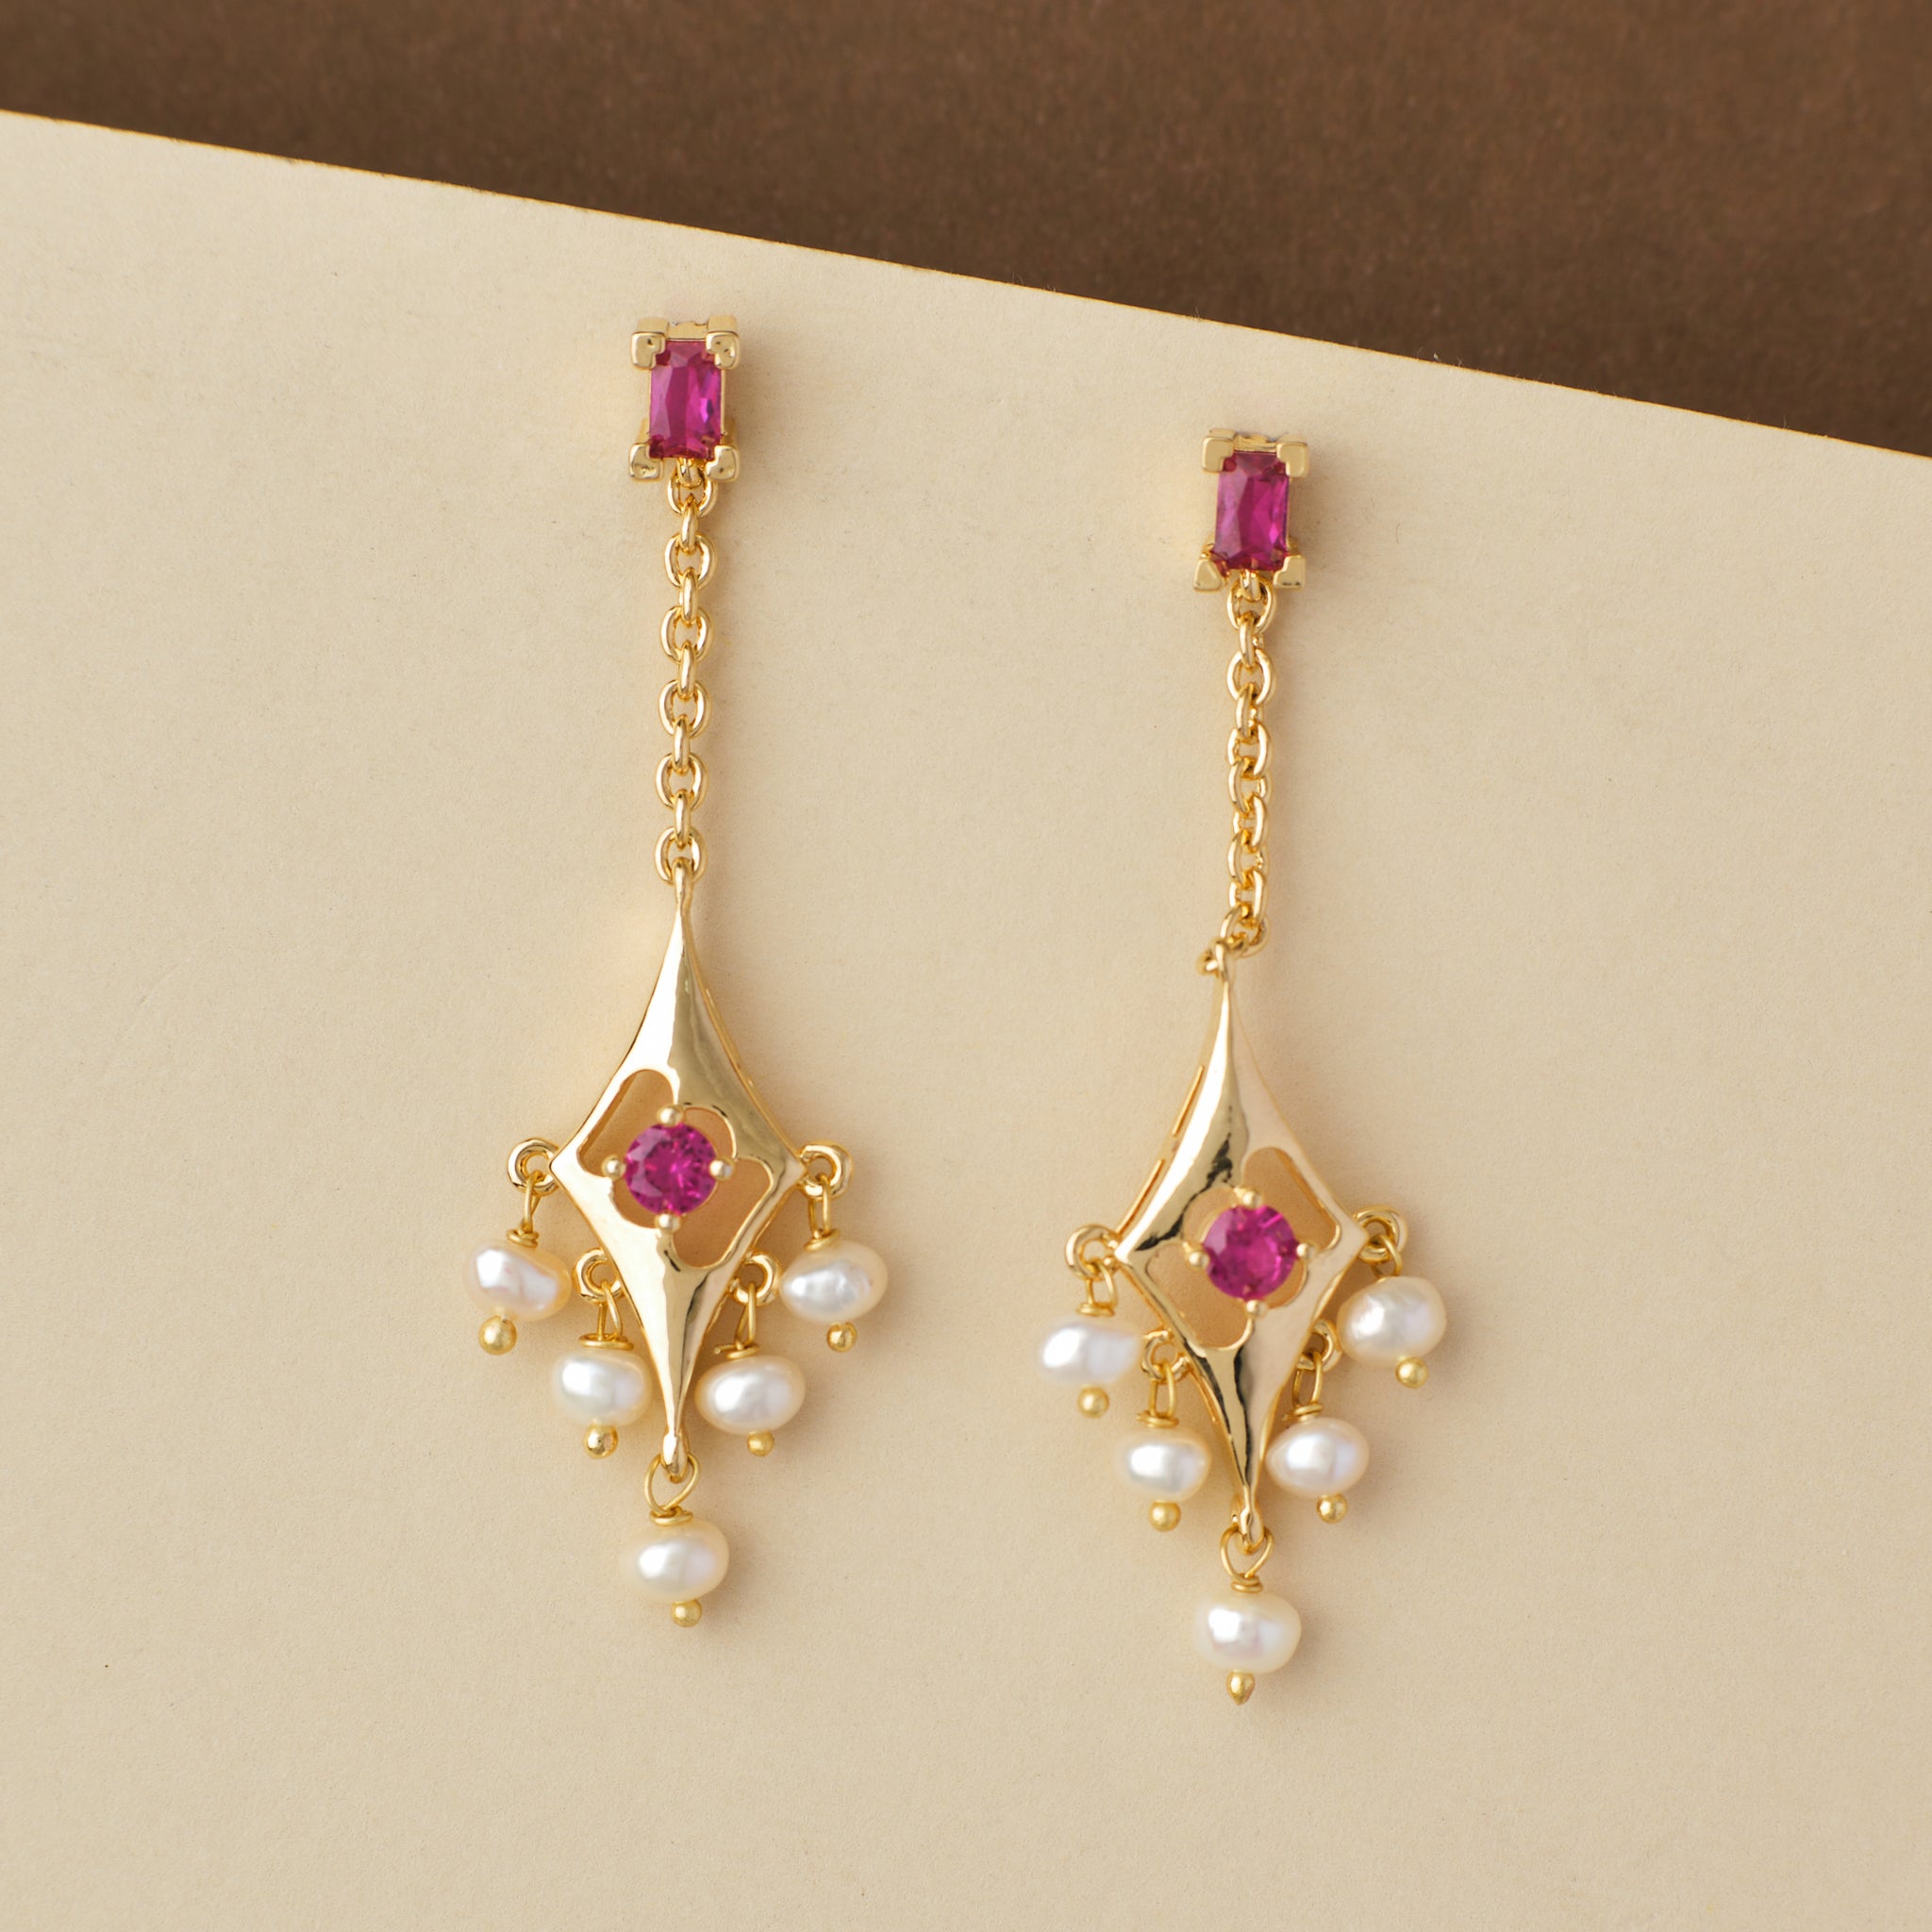 Ethnic Pearl Hanging Jhumkas with pink gemstones and pearl accents on a beige background by Chandrani Pearls India.